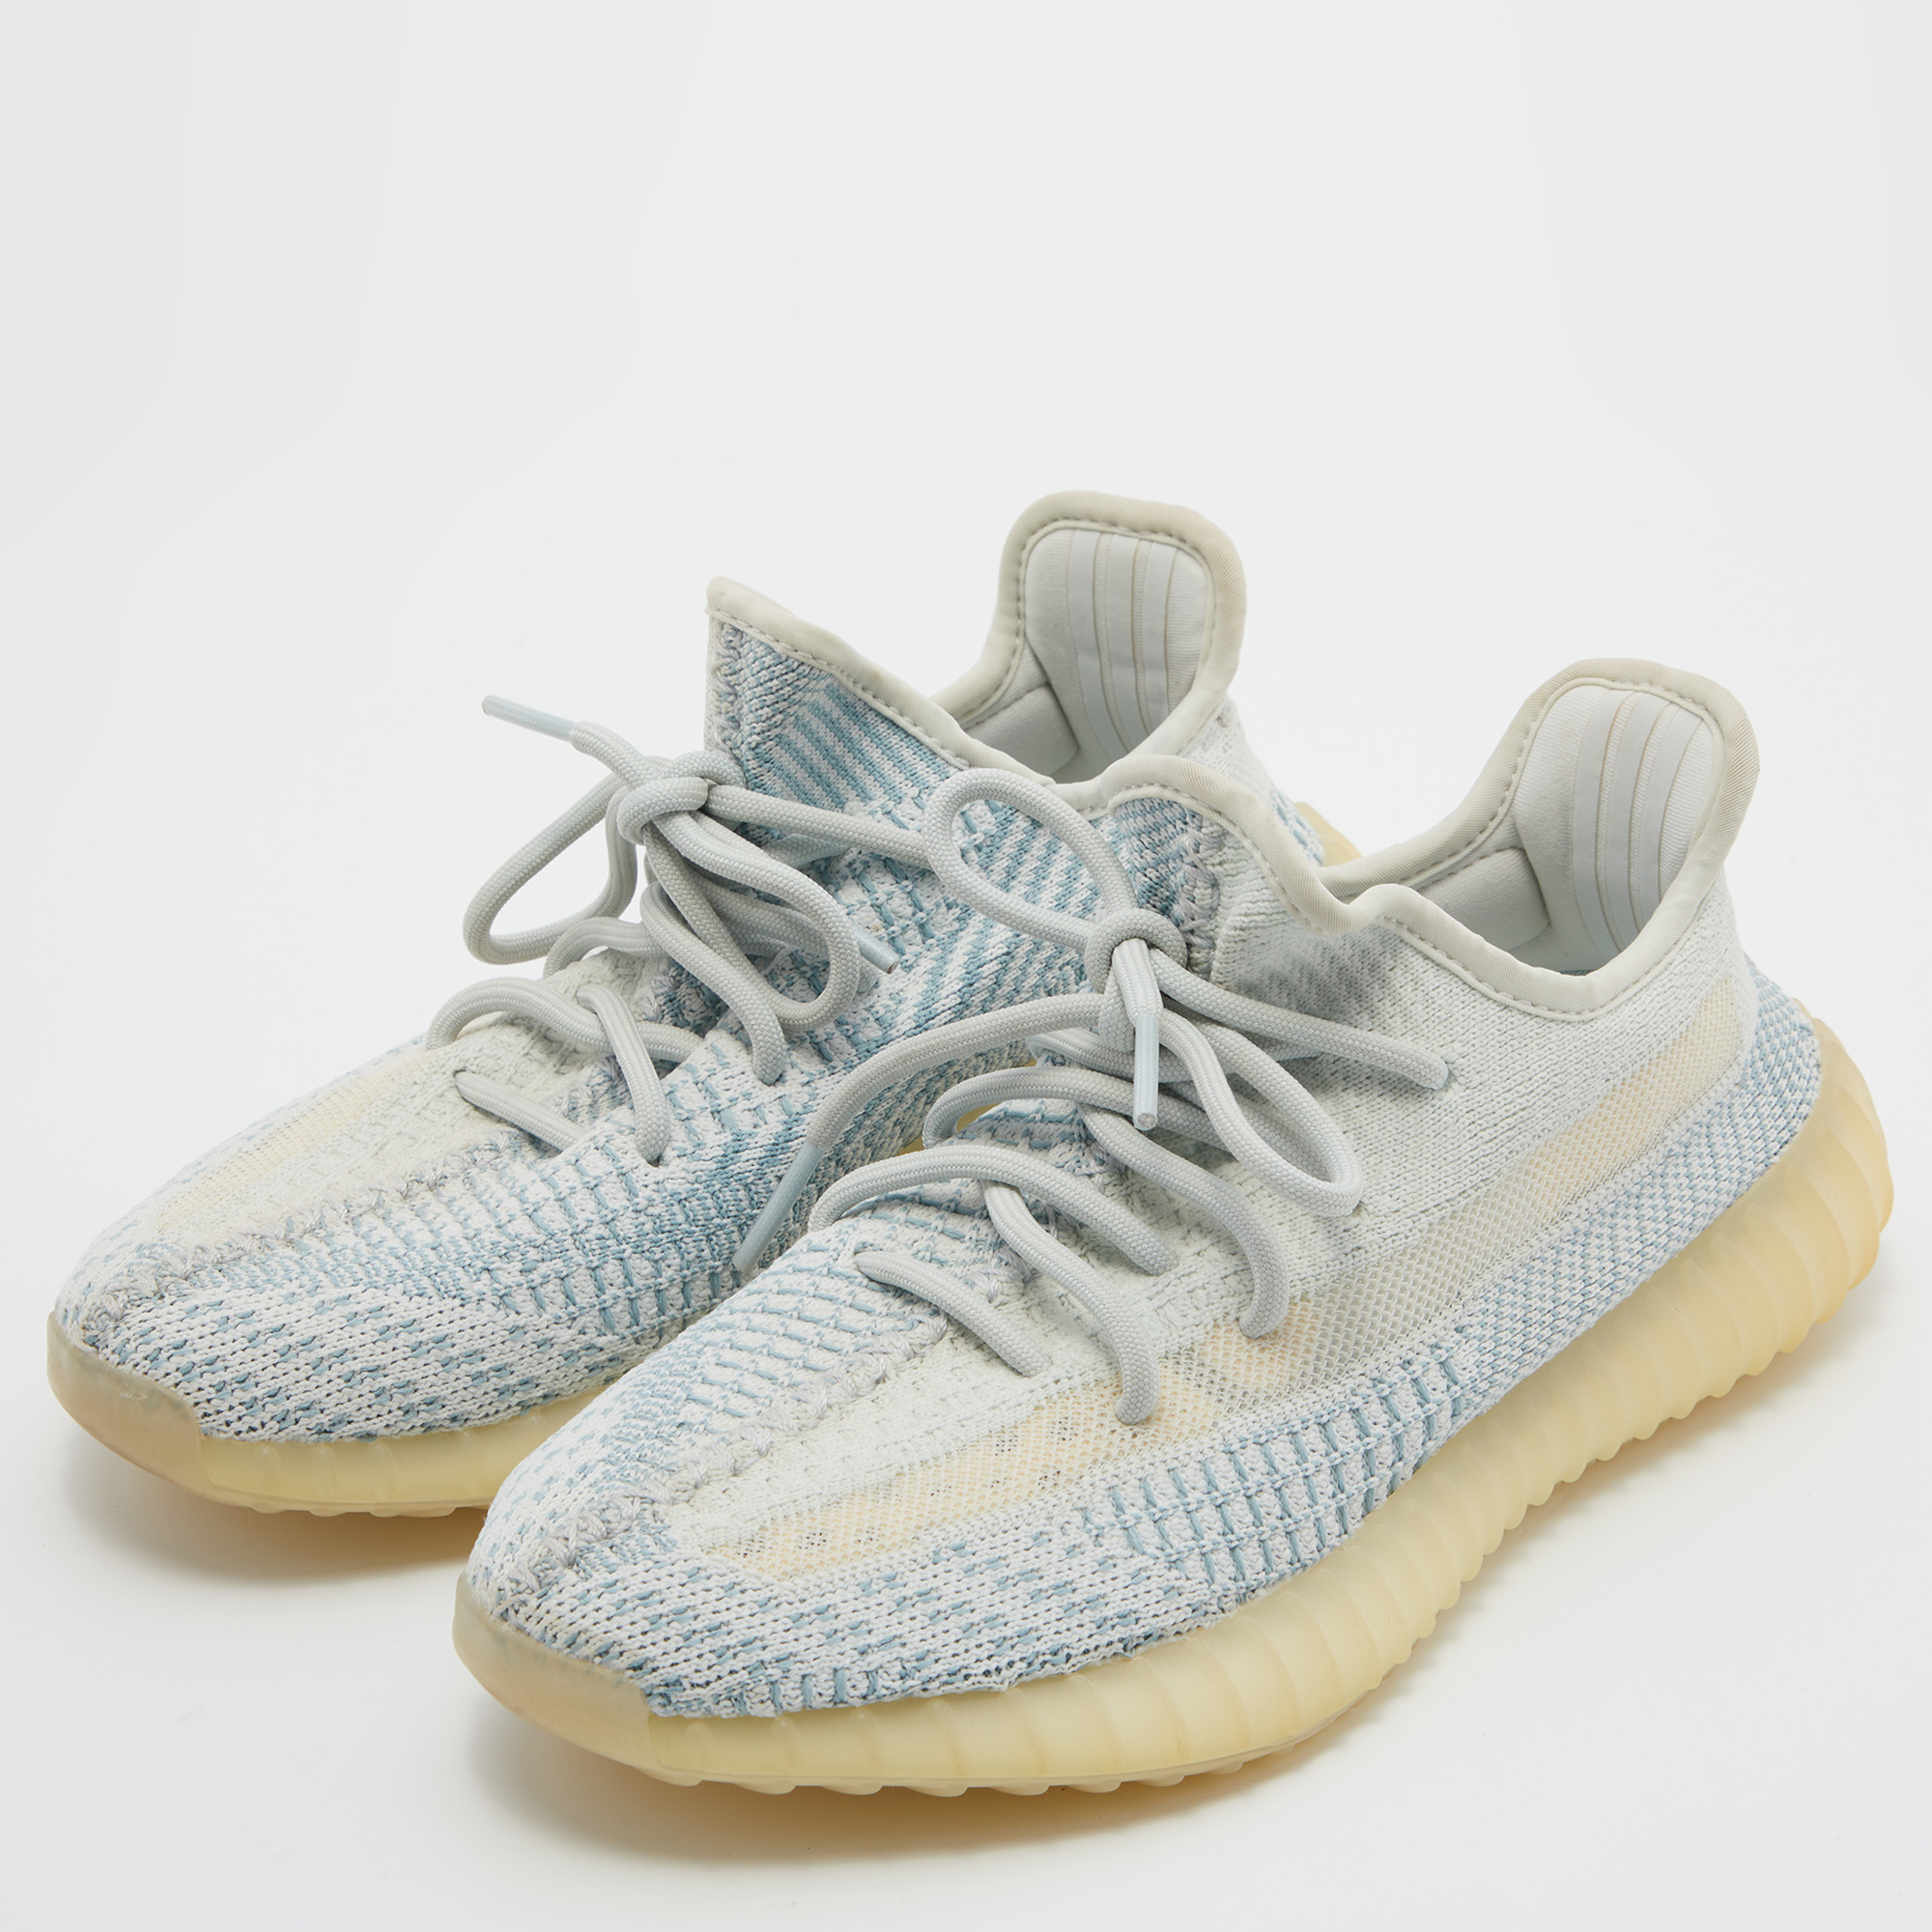 

Yeezy x Adidas Blue/White Knit Fabric Boost 350 V2 Cloud White Sneakers Size 38 2/3